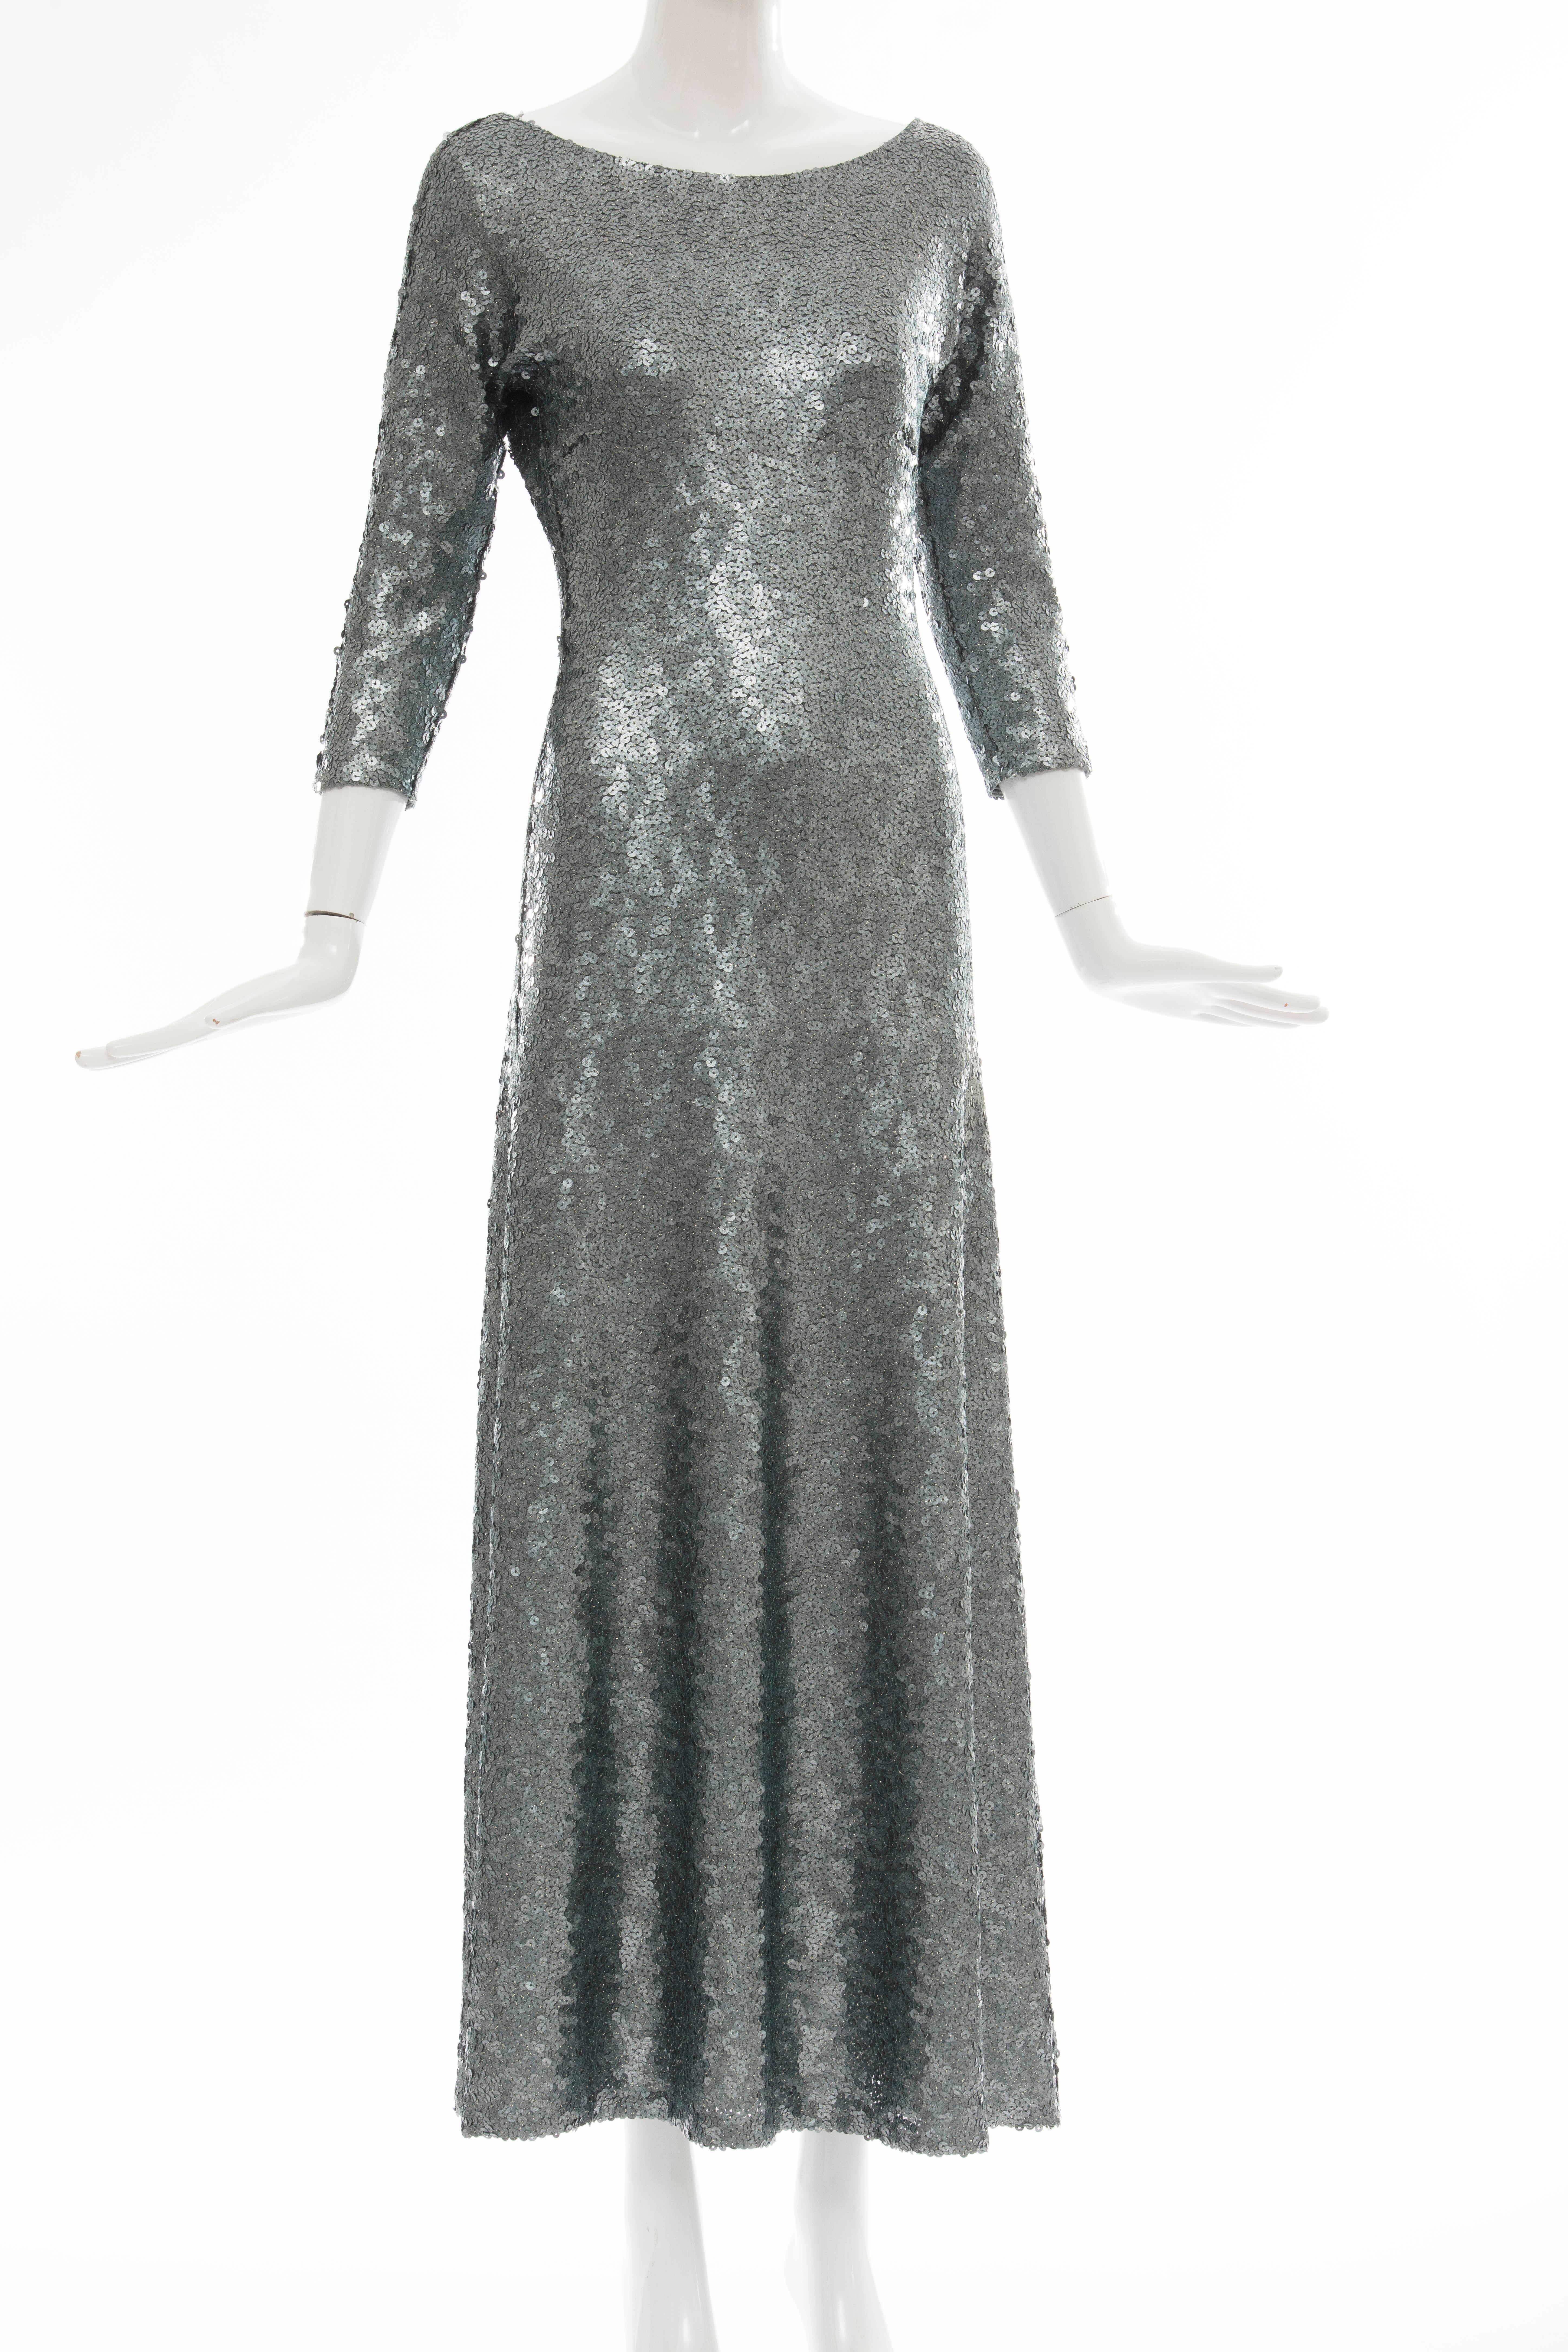 Marc Jacobs Fall/Winter 2013 sequin gown with scoop back, back zip and fully lined. This dress was showcased on the cover of Vogue magazine with Sandra Bullock wearing one like it.